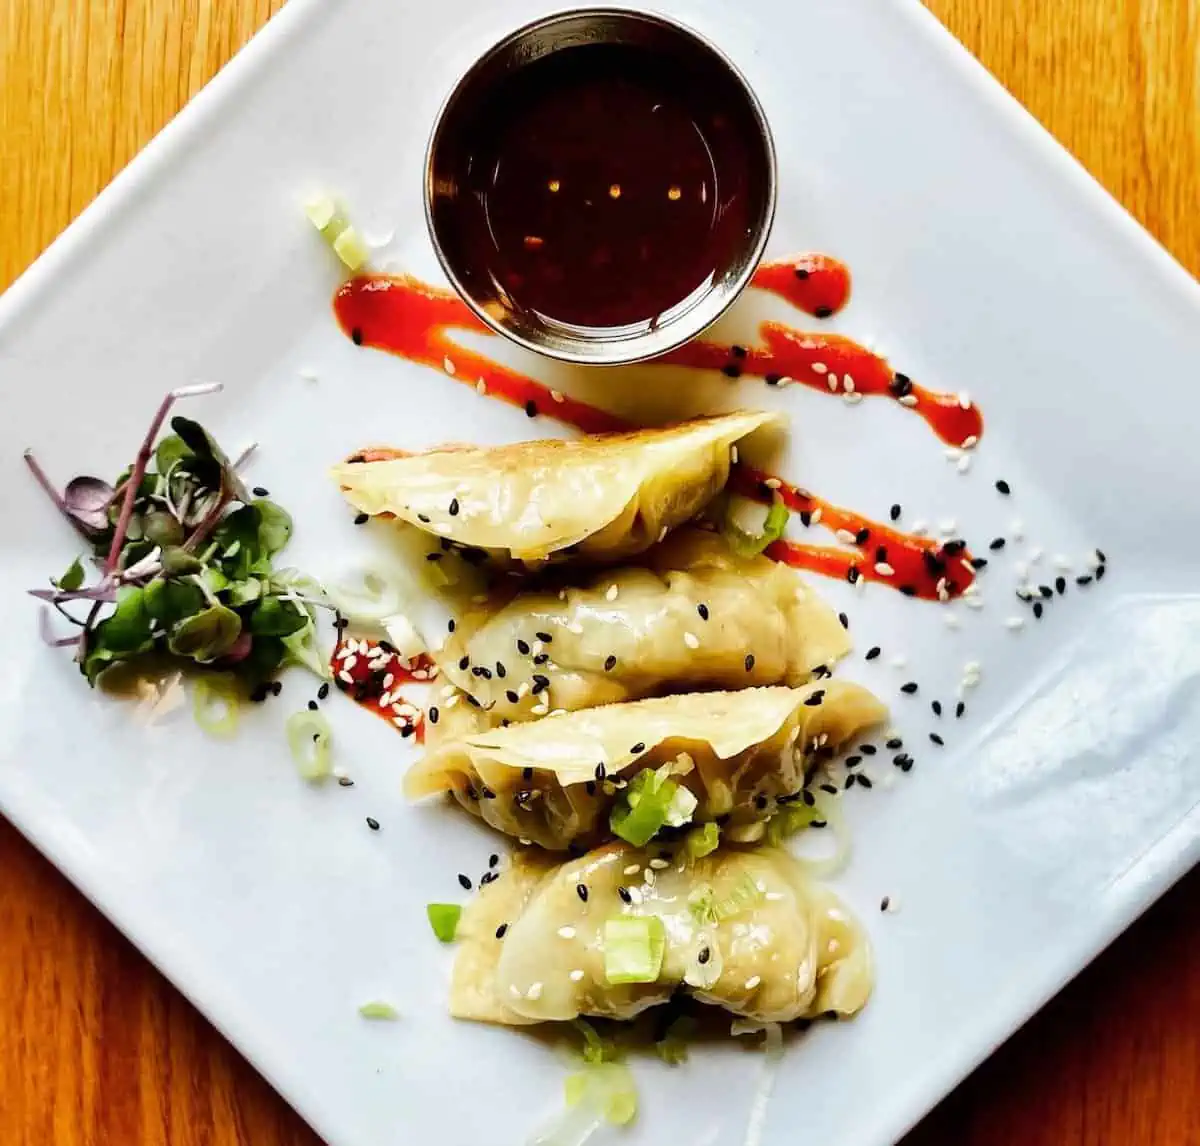 Vegan gyozas from Laughing Seed Café in Asheville.